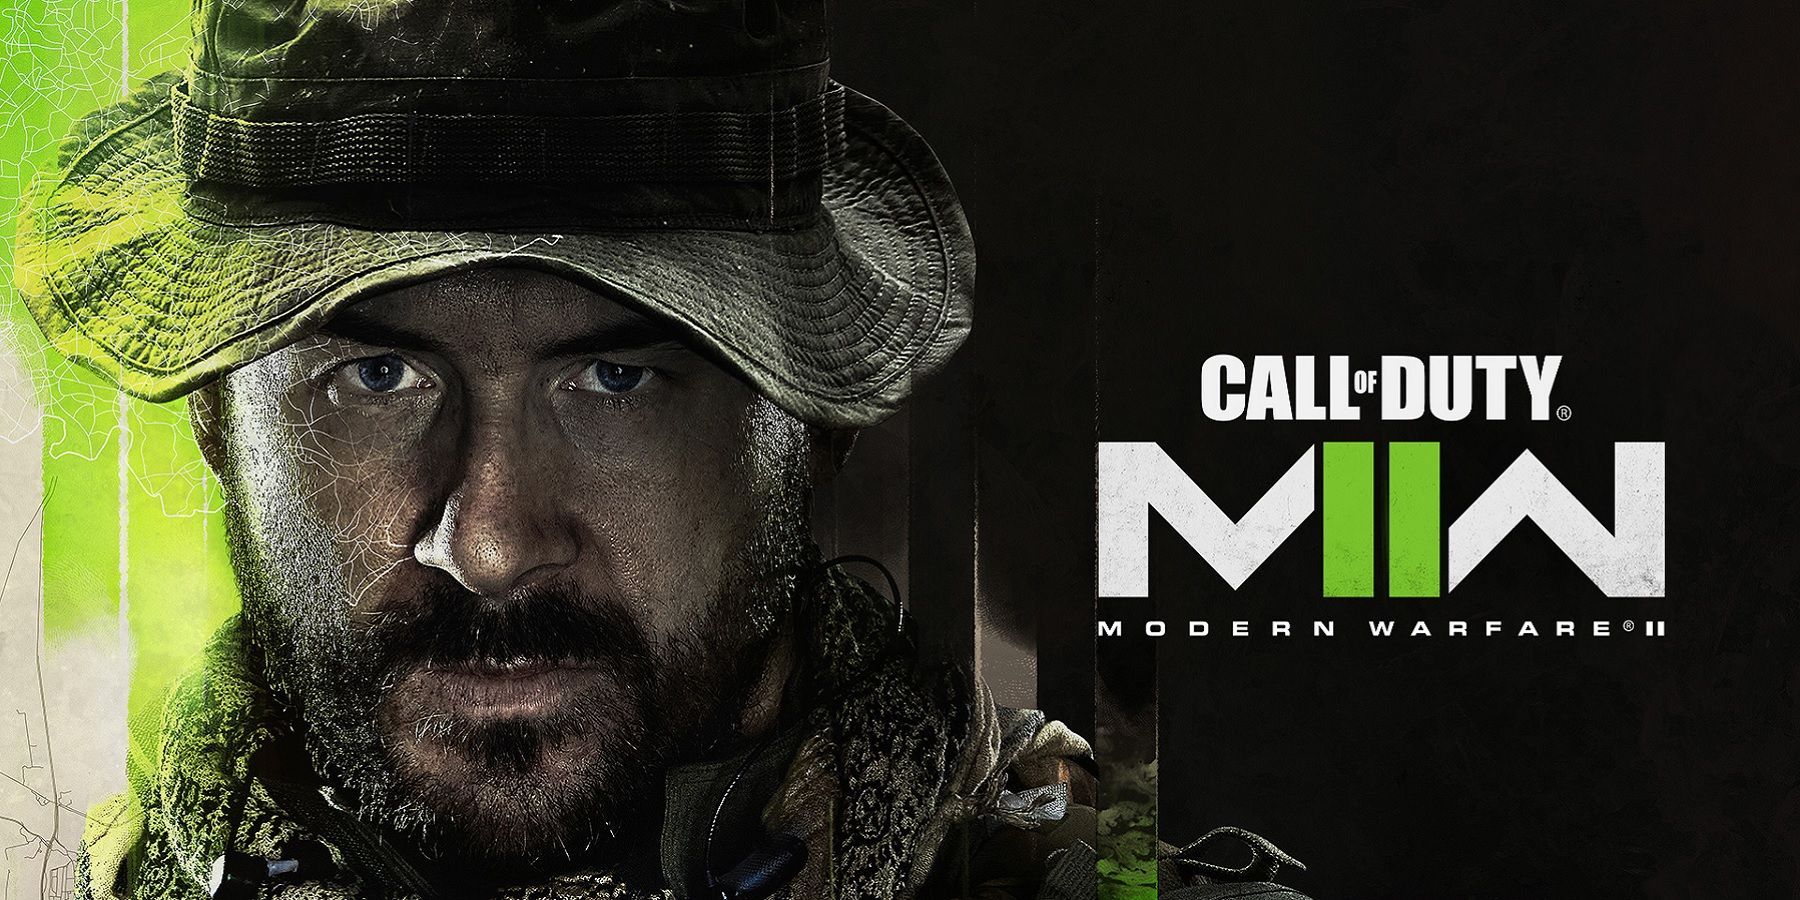 captain price with call of duty modern warfare 2 logo